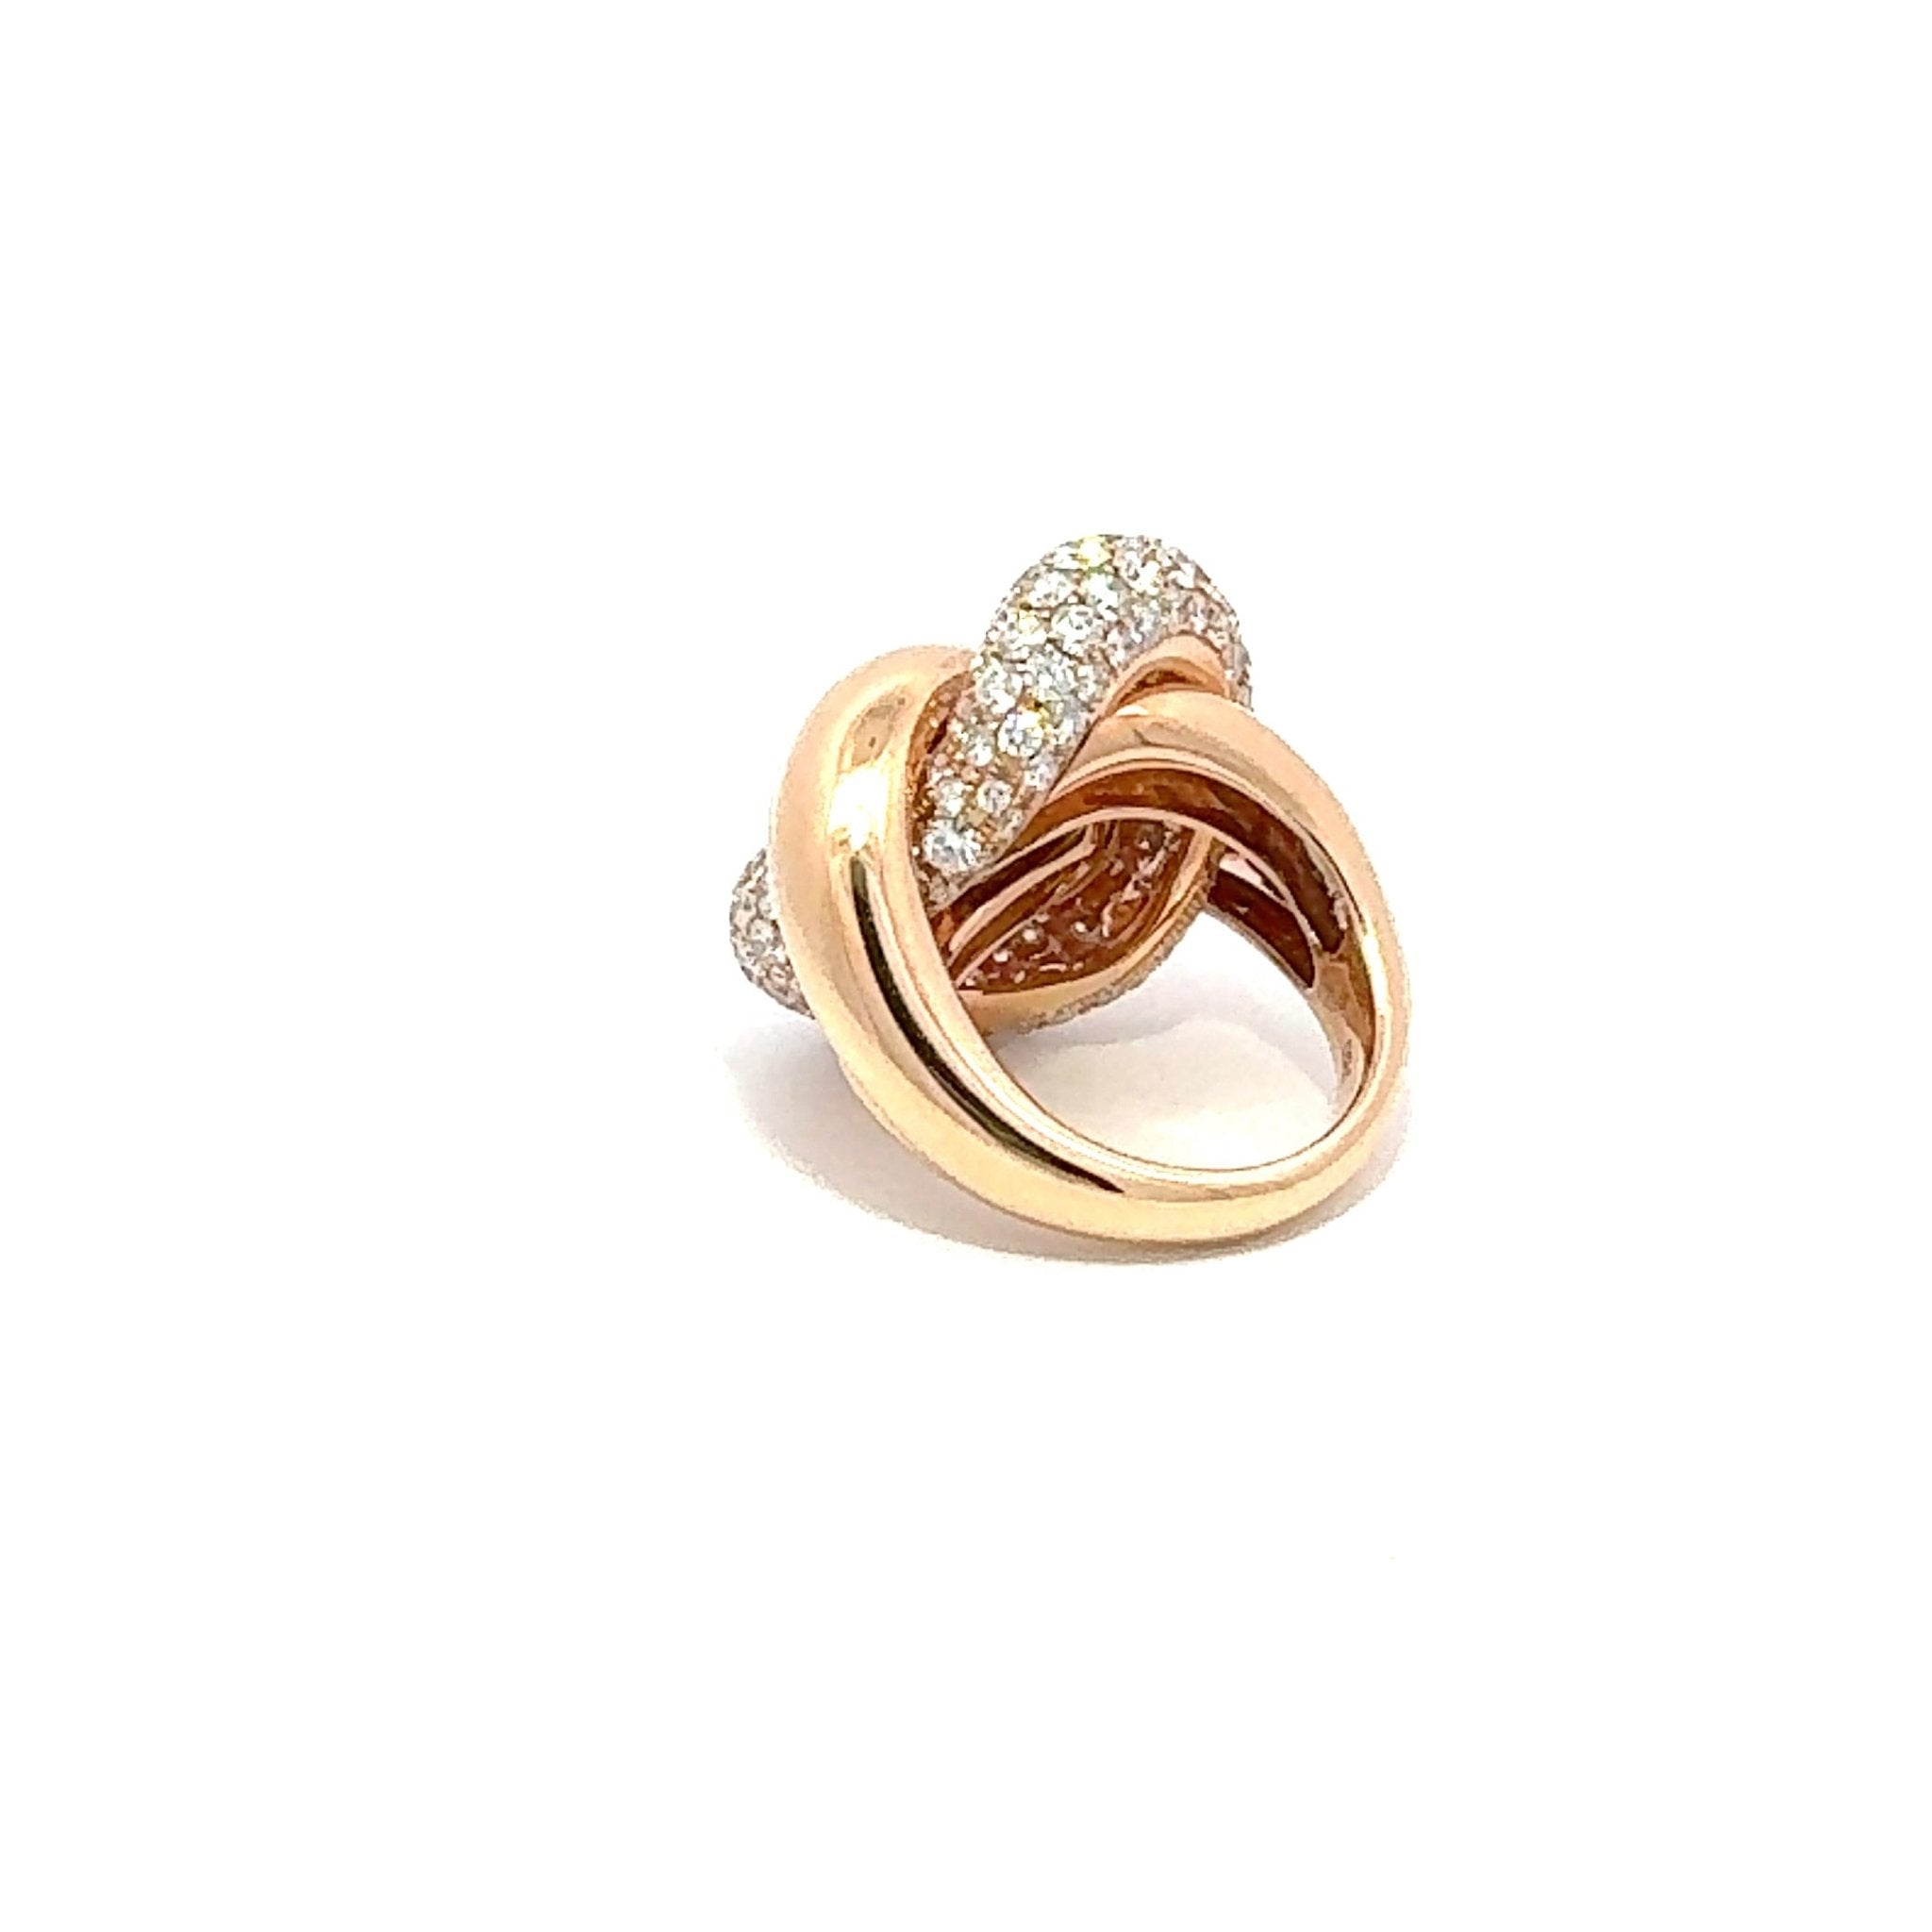 Chain Style Diamond 18K Yellow Gold Exclusive Ring by Natkina